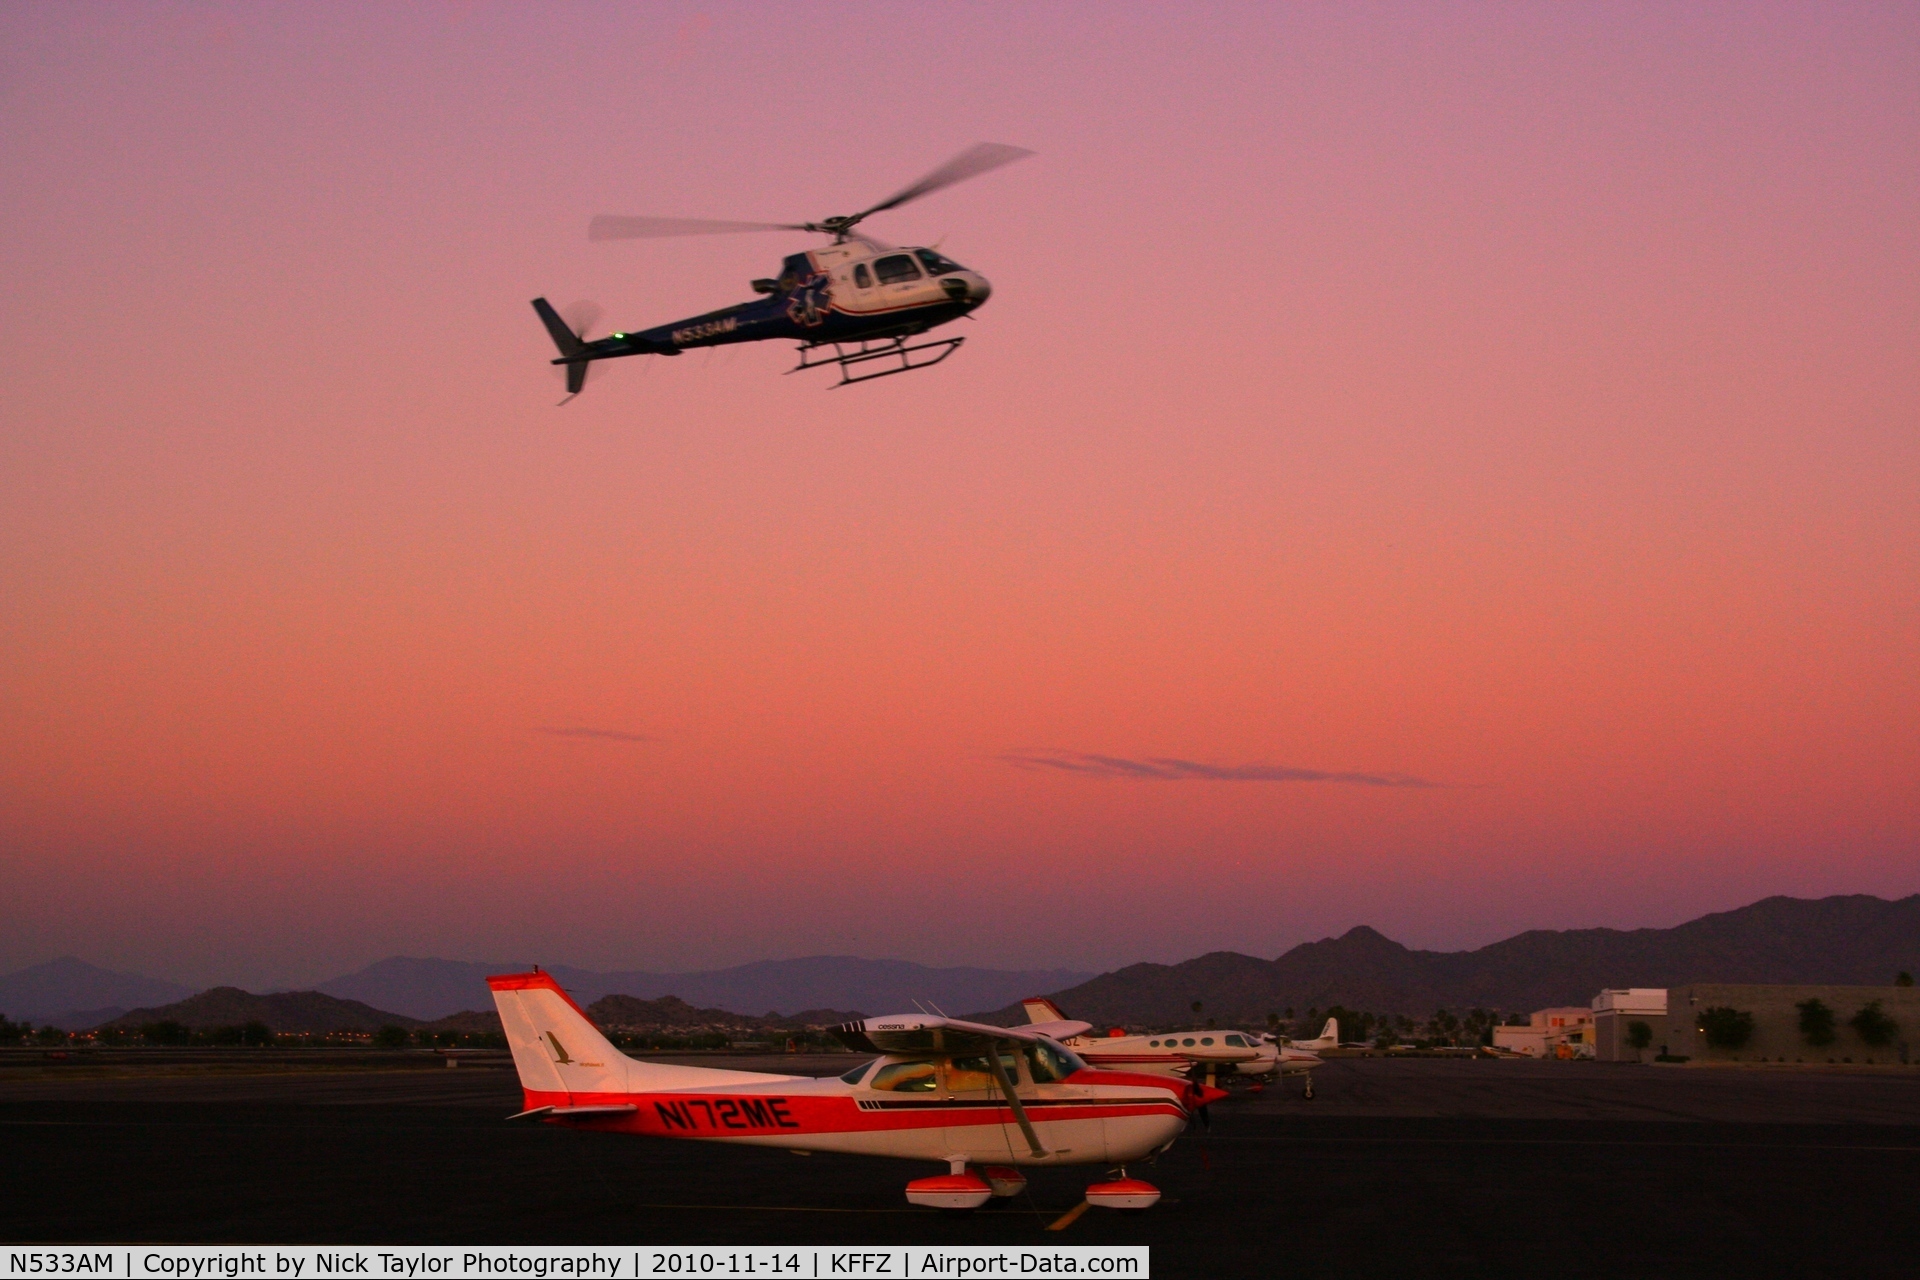 N533AM, Eurocopter AS-350B-3 Ecureuil Ecureuil C/N 4620, Landing at Mesa near the base of the tower